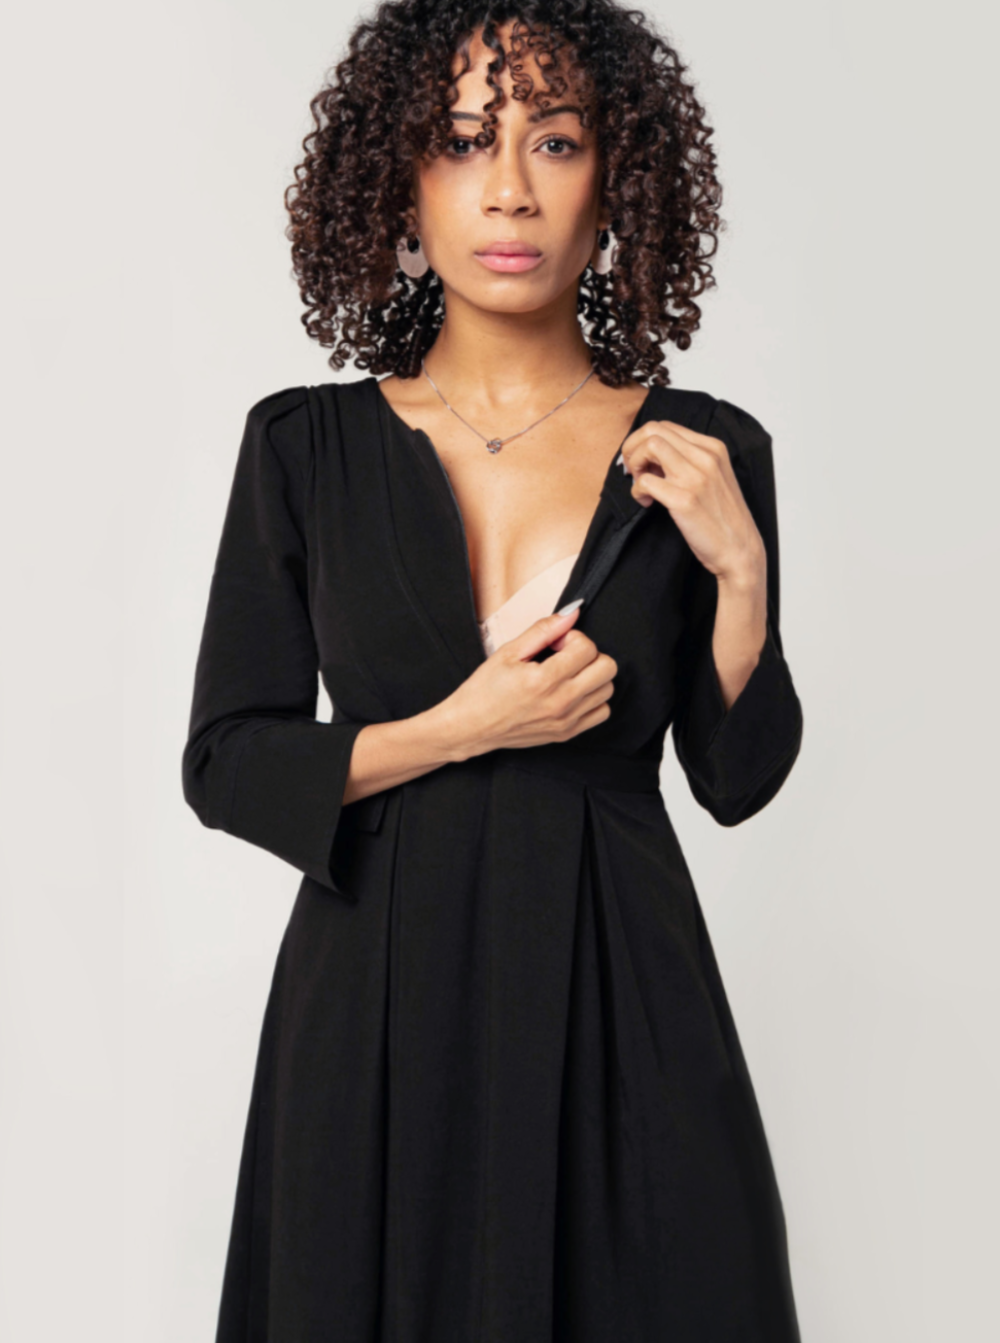 Black maternity and nursing dresses by MARION. Sustainable TENCEL empire waist style with deep pockets and full feminine skirt. Breastfeeding friendly with 3/4 sleeves and elegant cuff detail. Petite sizing also available. Maternity workwear favorite.